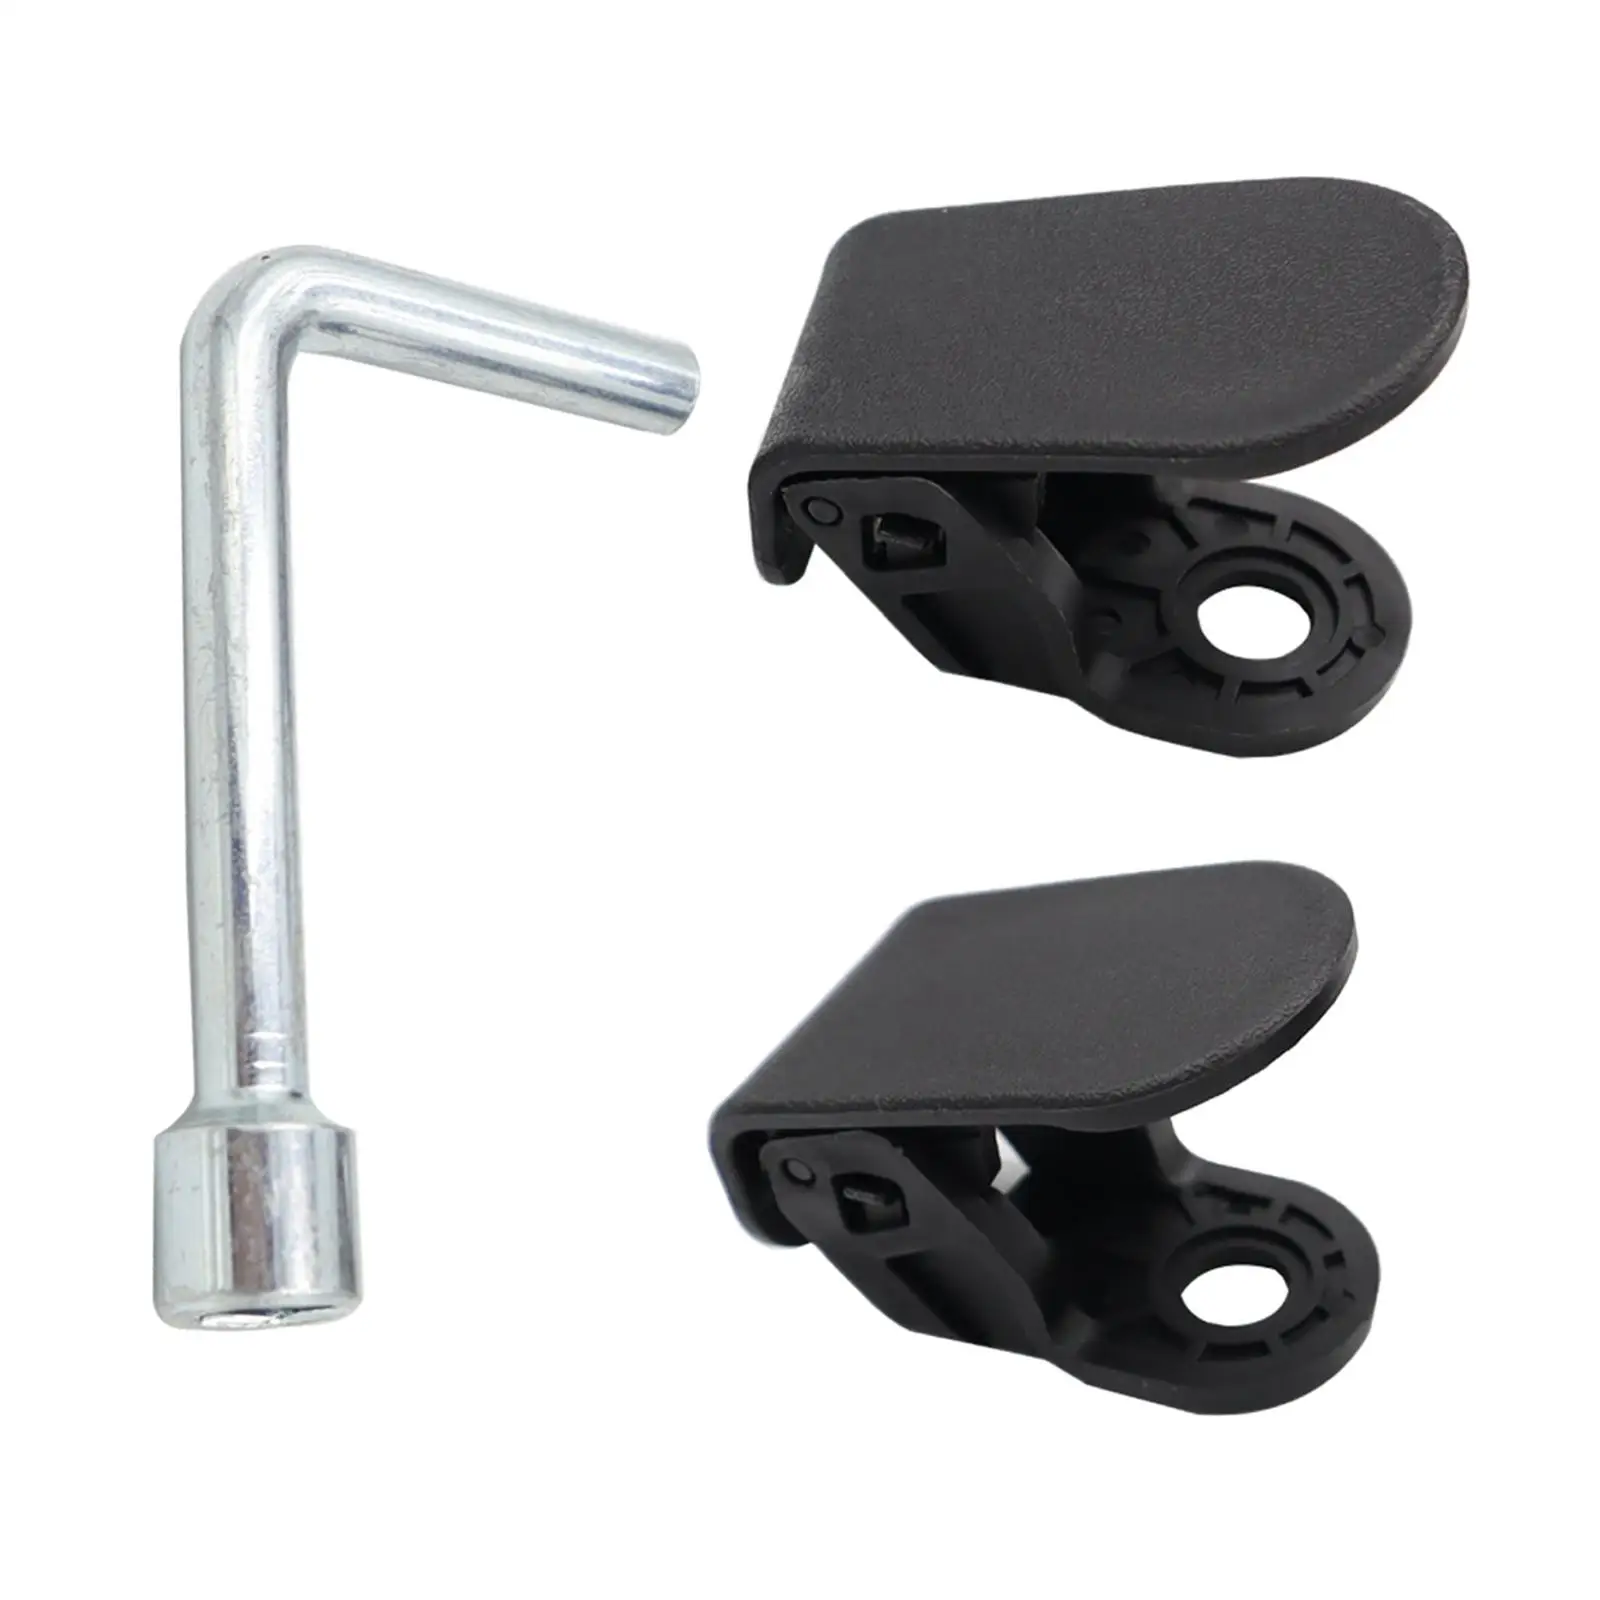 2Pcs Front Trunk Hook Concealed Bolt Covers Bag Hanger for Tesla Model 3 2019 2020 Easy to Install Accessories Professional